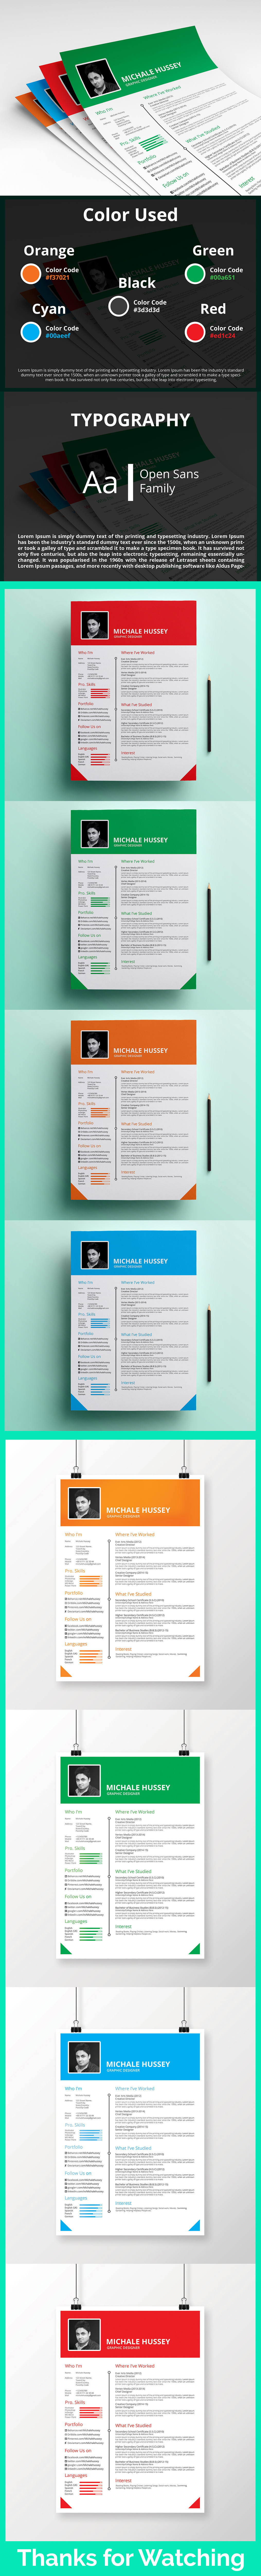 free resume template Free Resume a4 resume photoshop Illustrator flyer business card FREE flyer free business card free design template